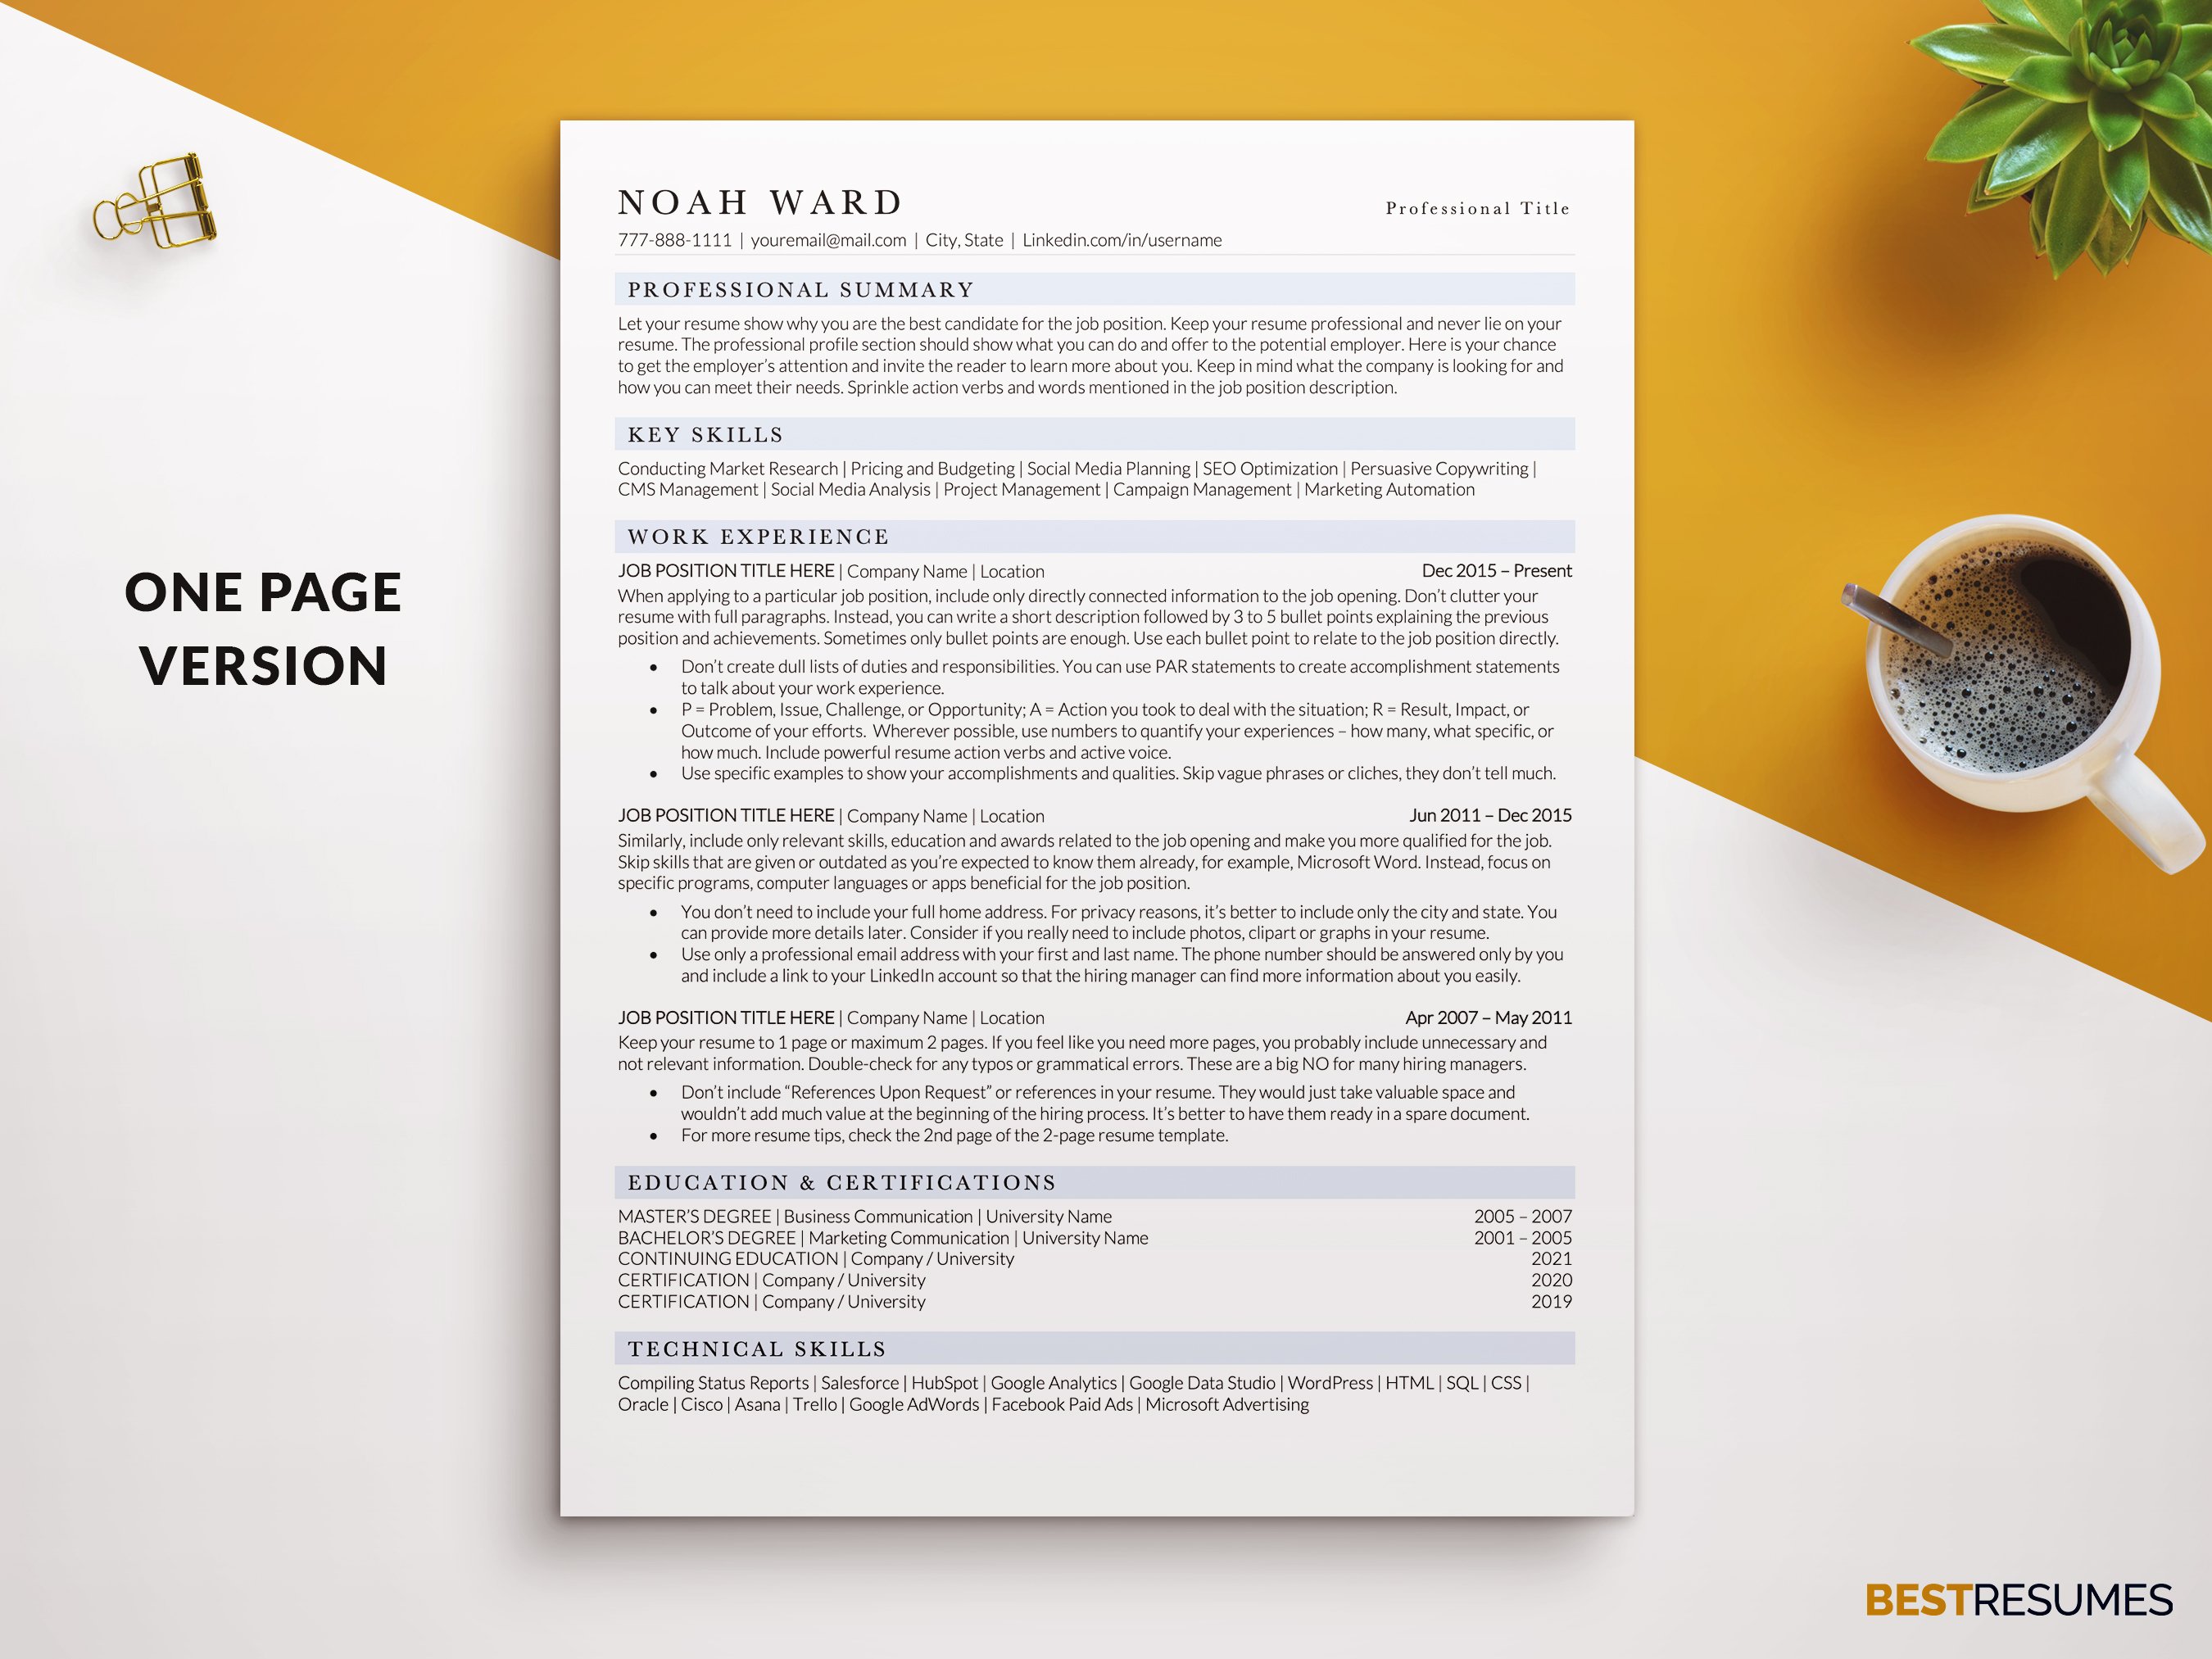 ATS Executive Resume Template Word preview image.